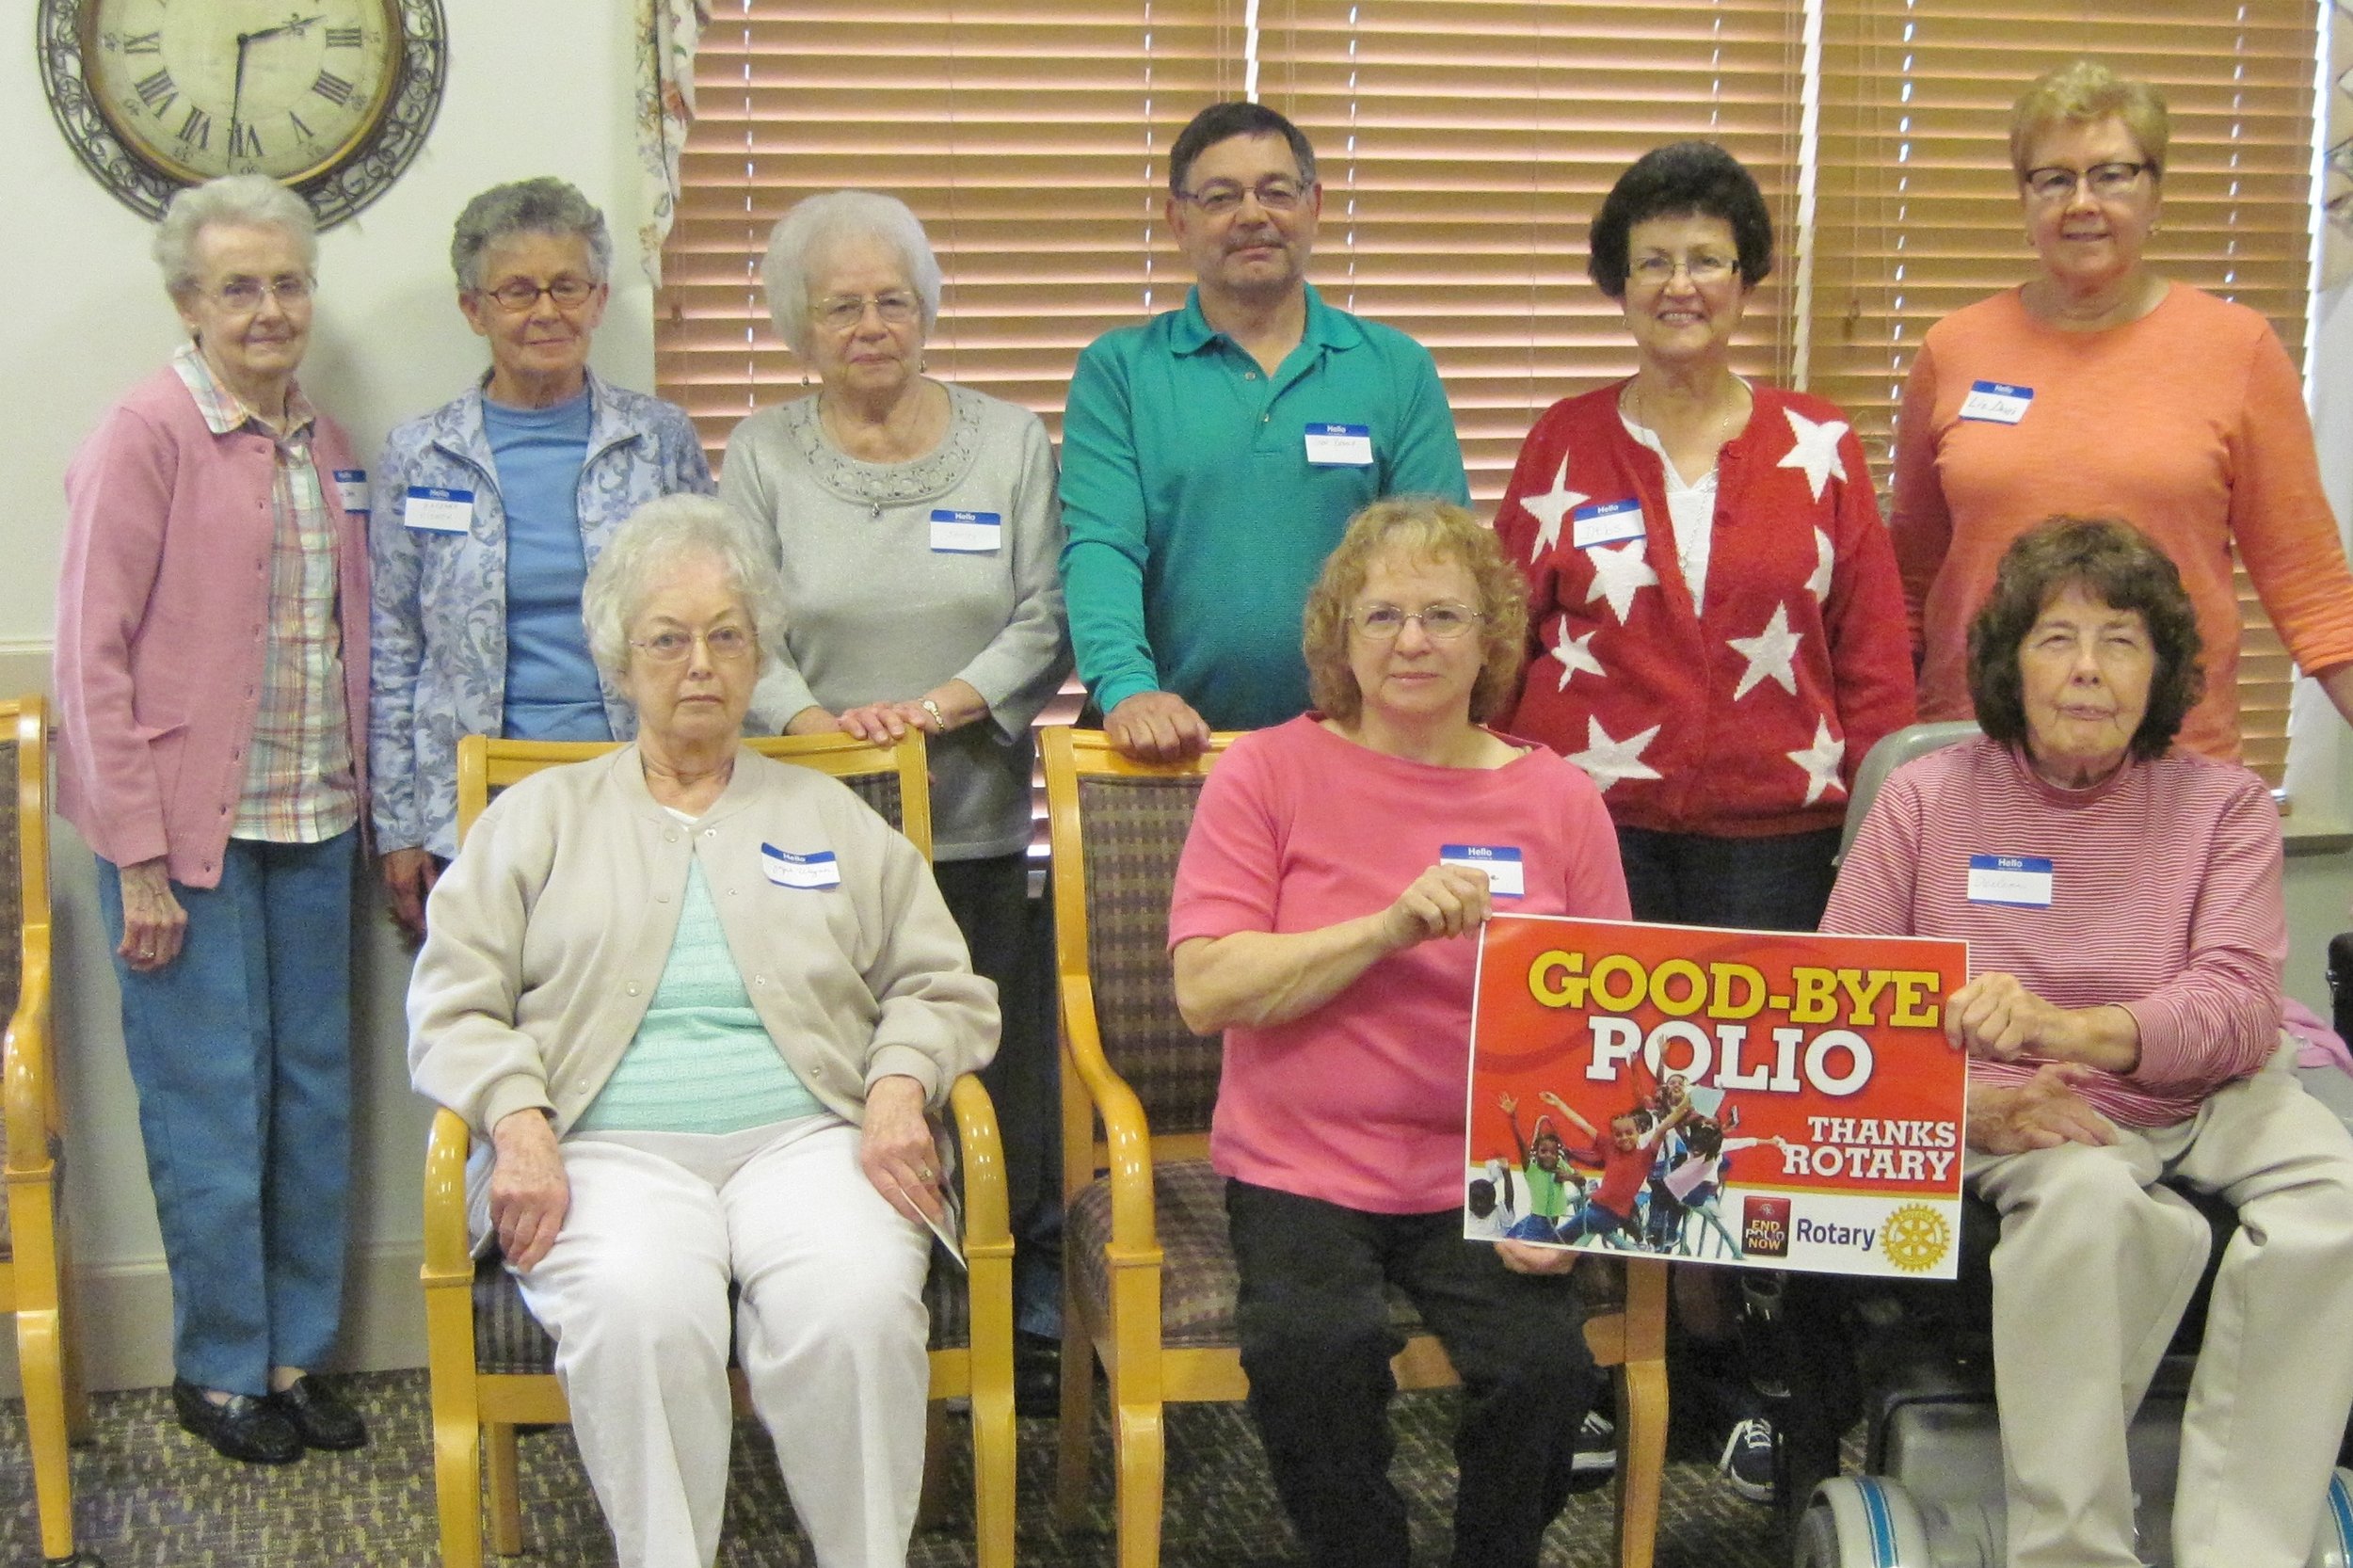  Hanover, PA Post-Polio Support Group supporting Rotary International’s efforts to eradicate polio, 2016 